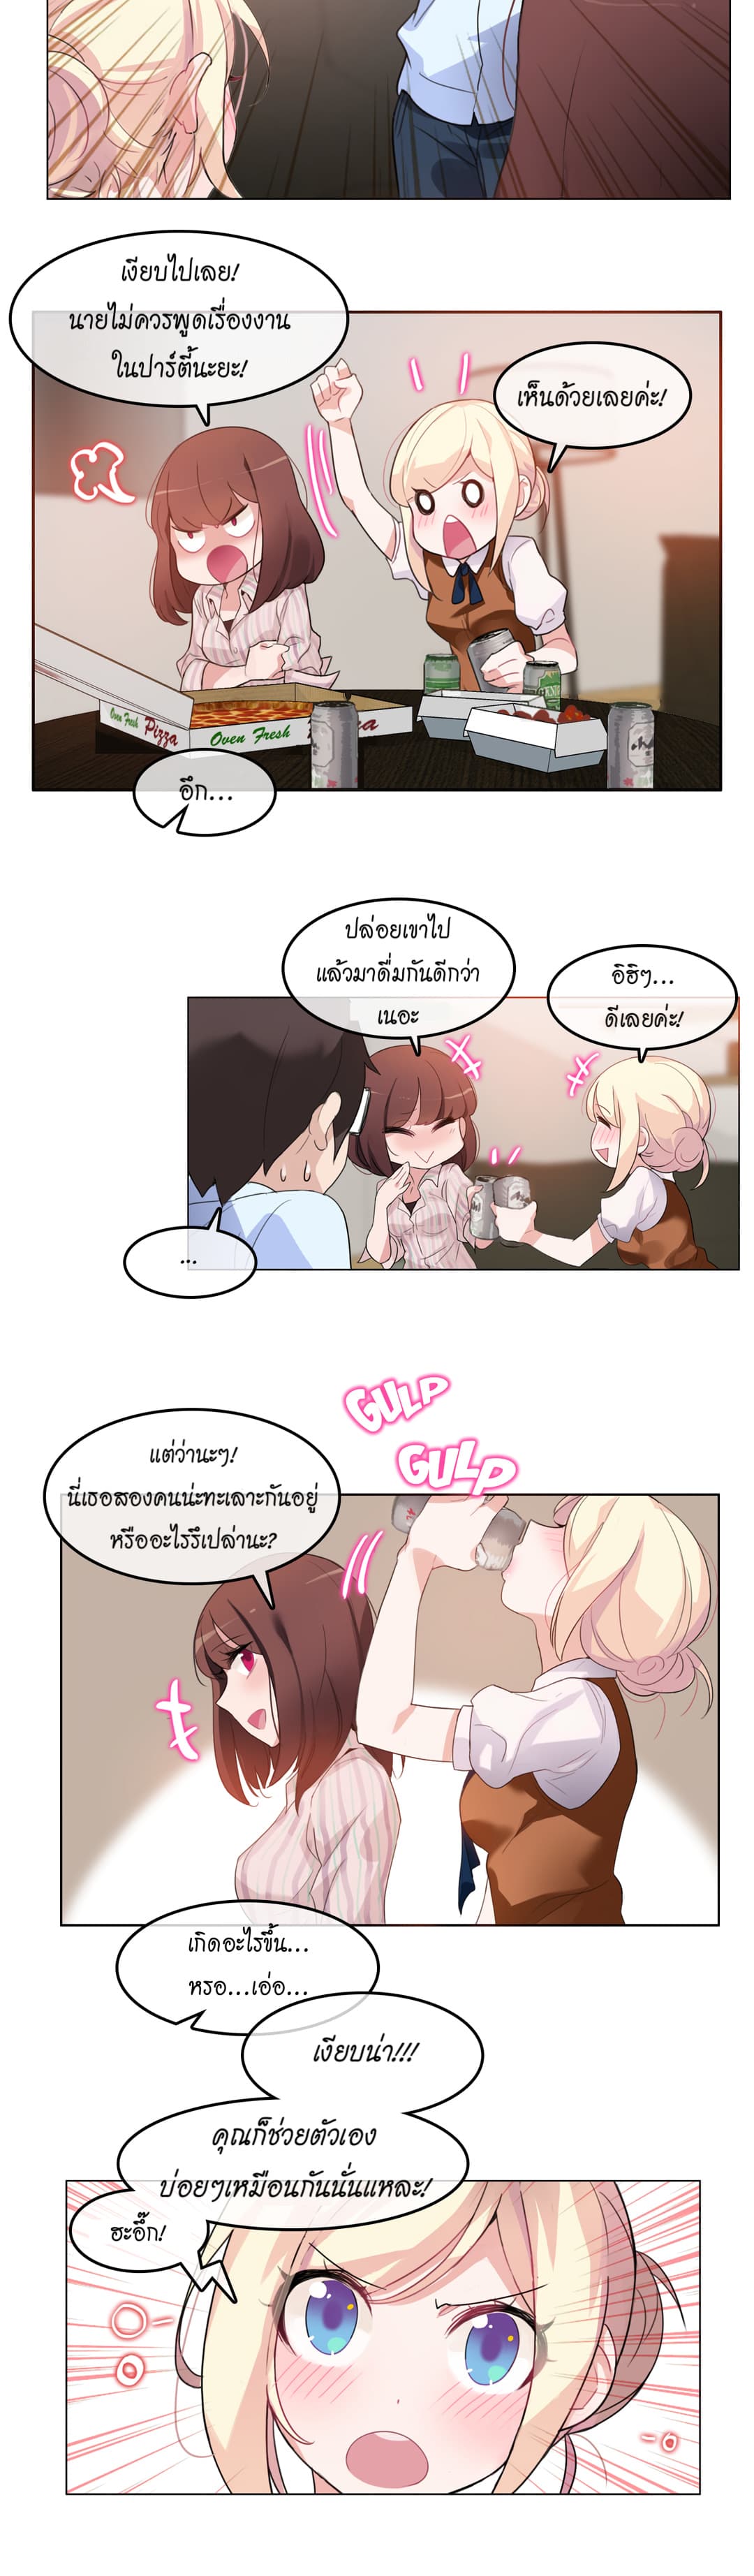 A Pervert’s Daily Life 9 (6)